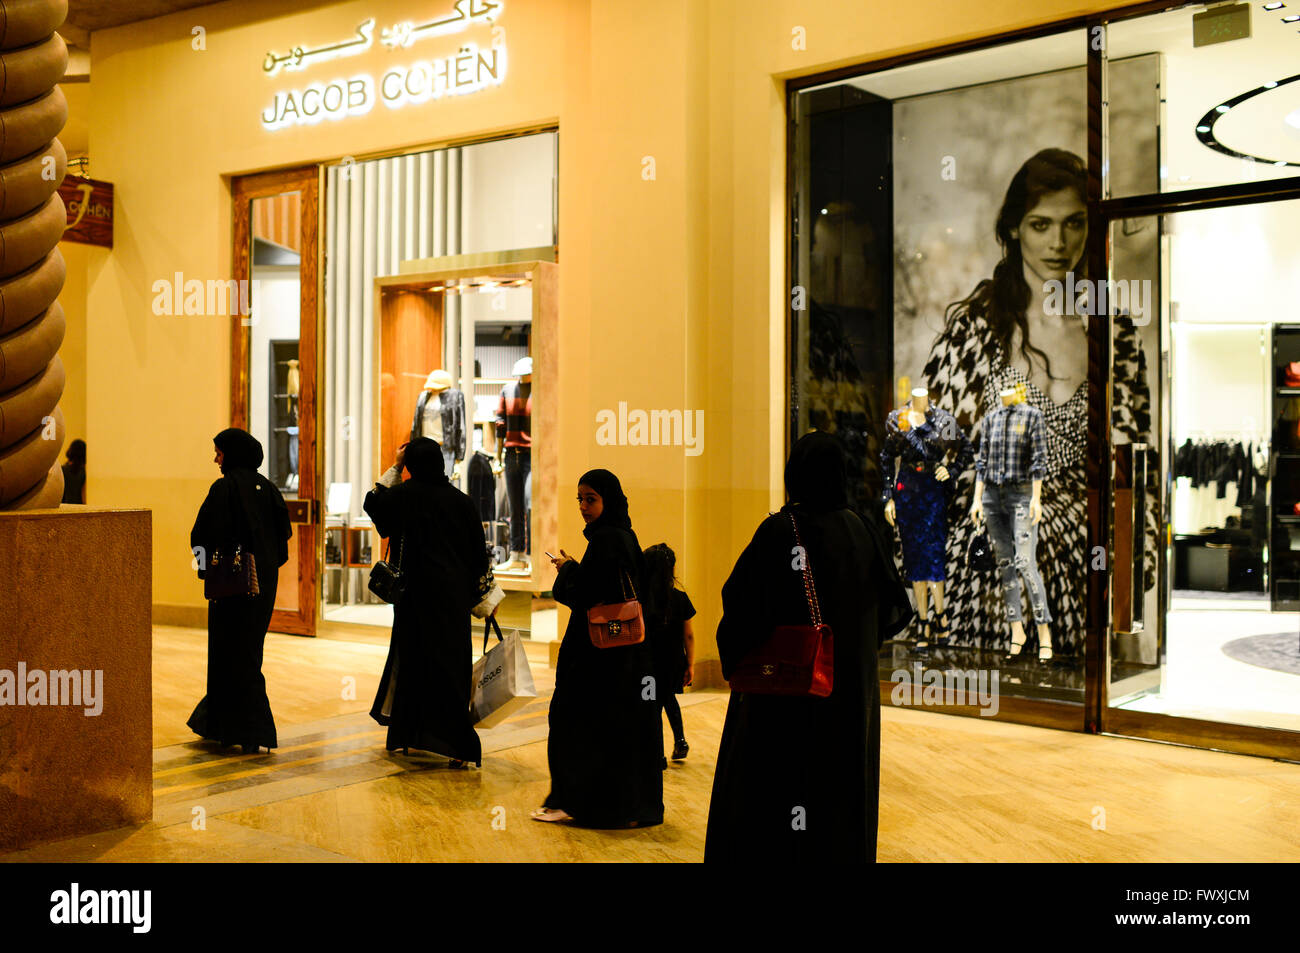 QATAR, Doha, luxury apartment space The Pearl, expensive boutiques with branded designer wear and fashion, international brand  and label , muslim women in black chador at window shopping Stock Photo